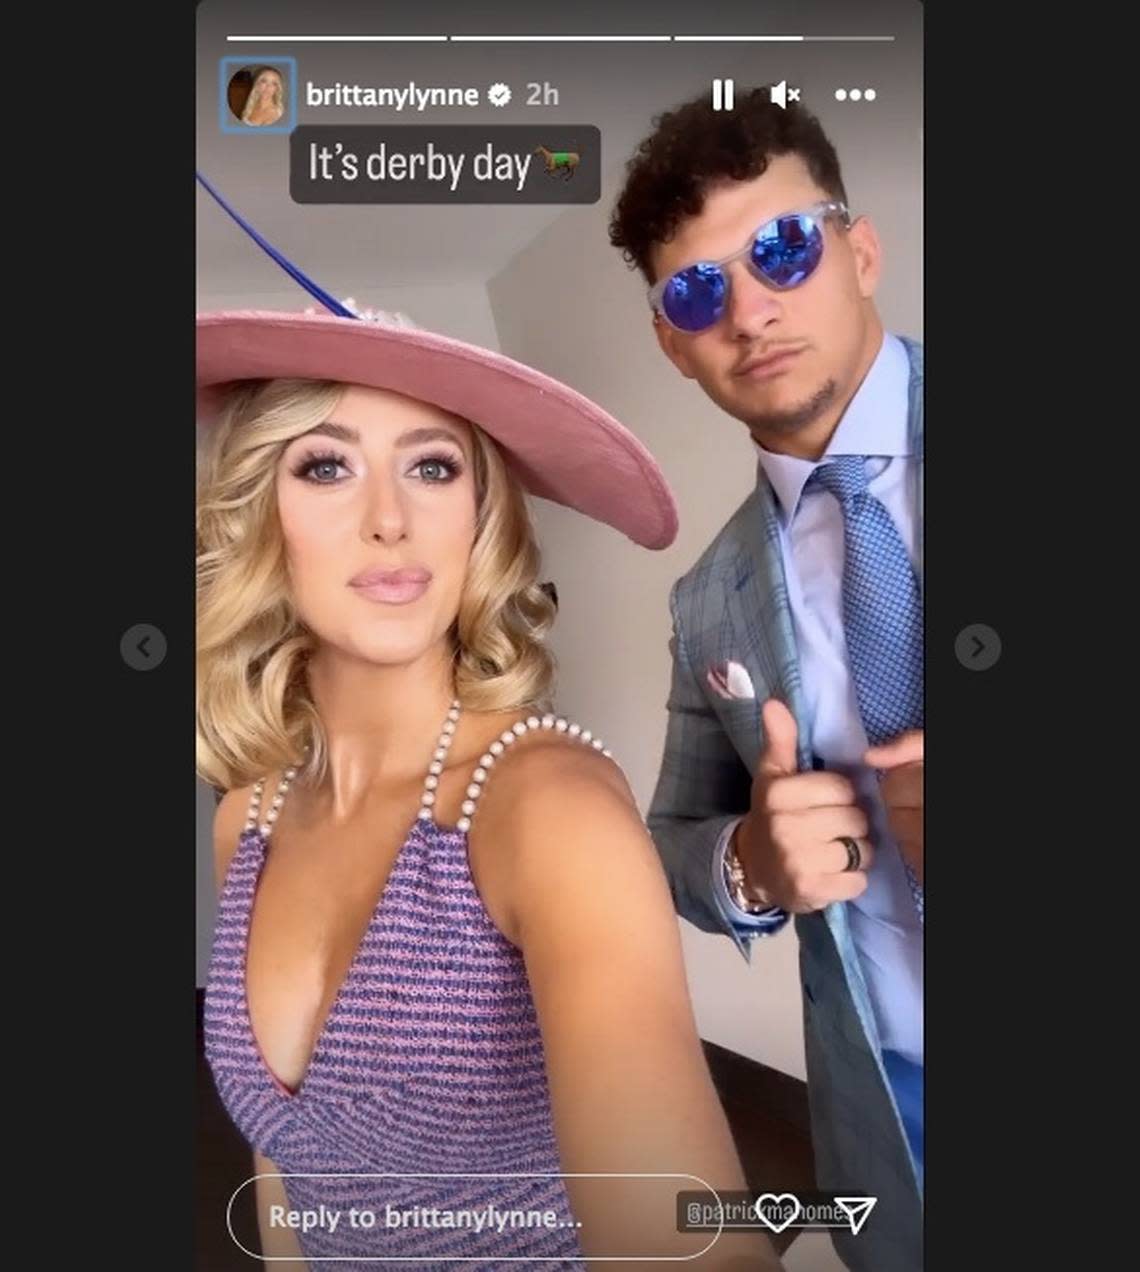 Chiefs quarterback Patrick Mahomes and his wife, Brittany, wore plaid and pearls on the Kentucky Derby red carpet Saturday, keeping their style low-key. It was the third red carpet of the week for the couple.